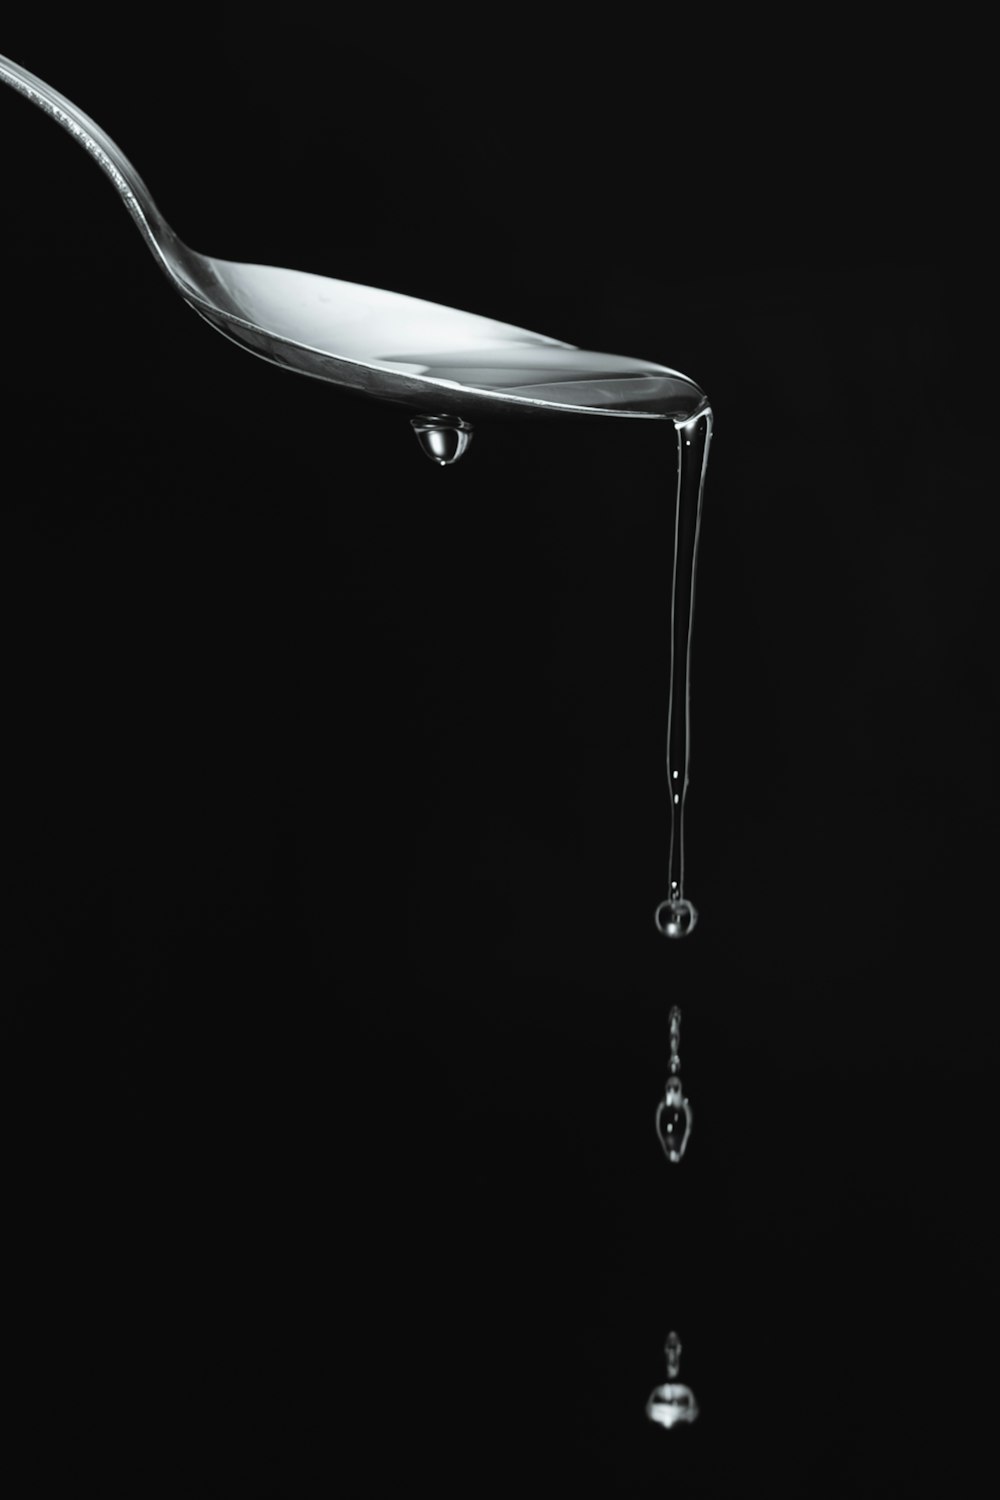 stainless steel faucet with water droplets